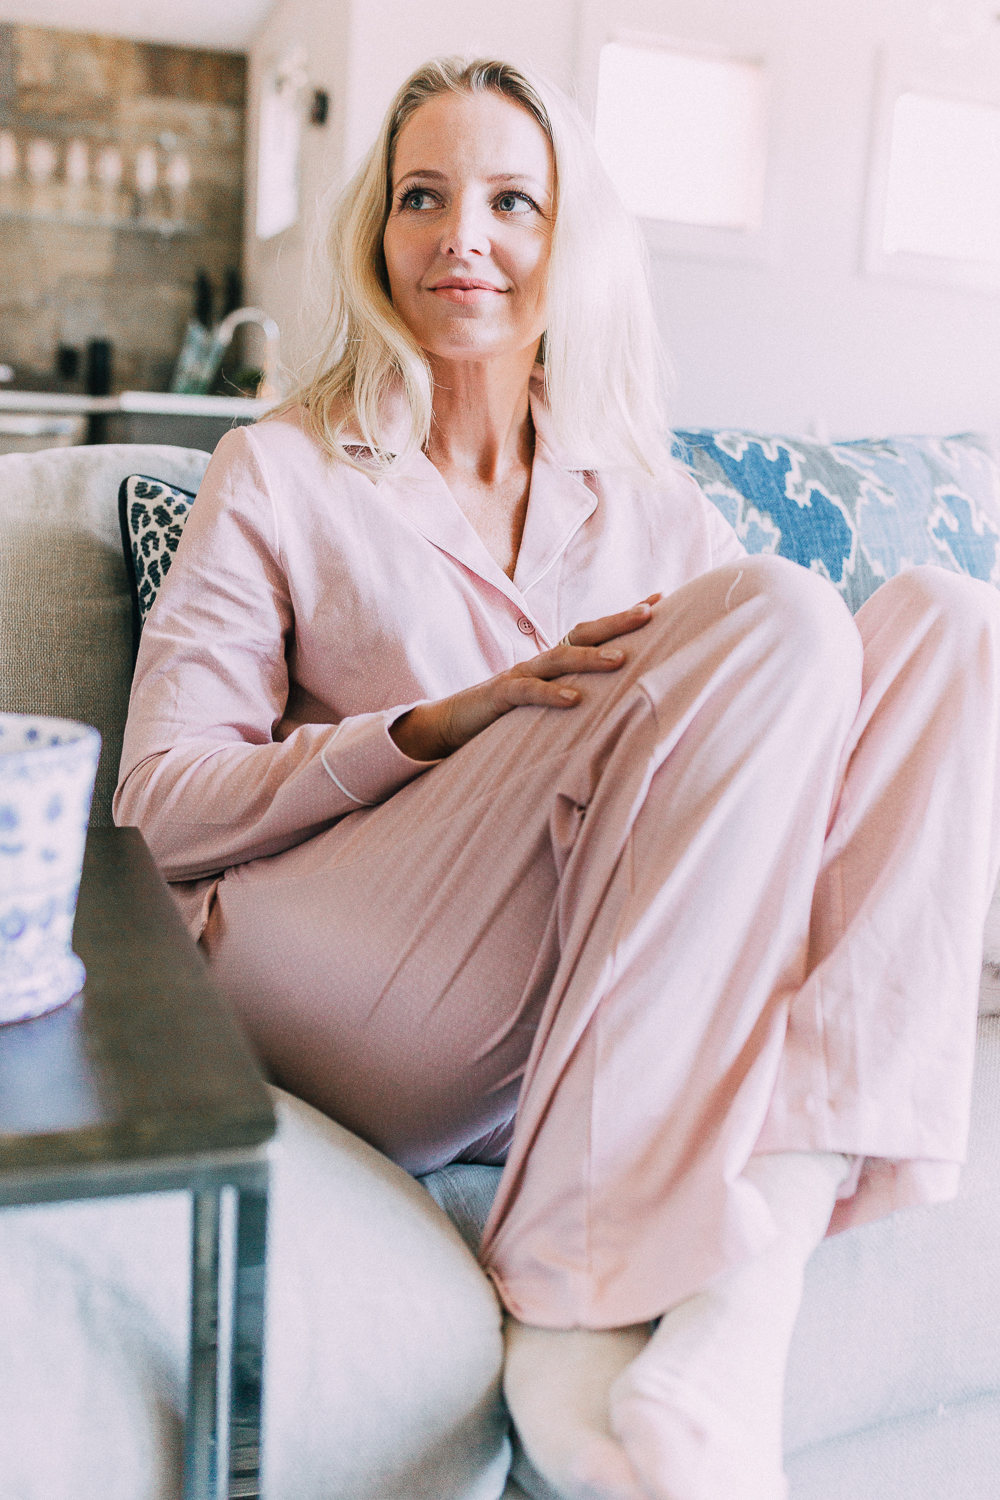 lightweight pajamas that keep you cool at night by Soma Intimates, Soma Solutions